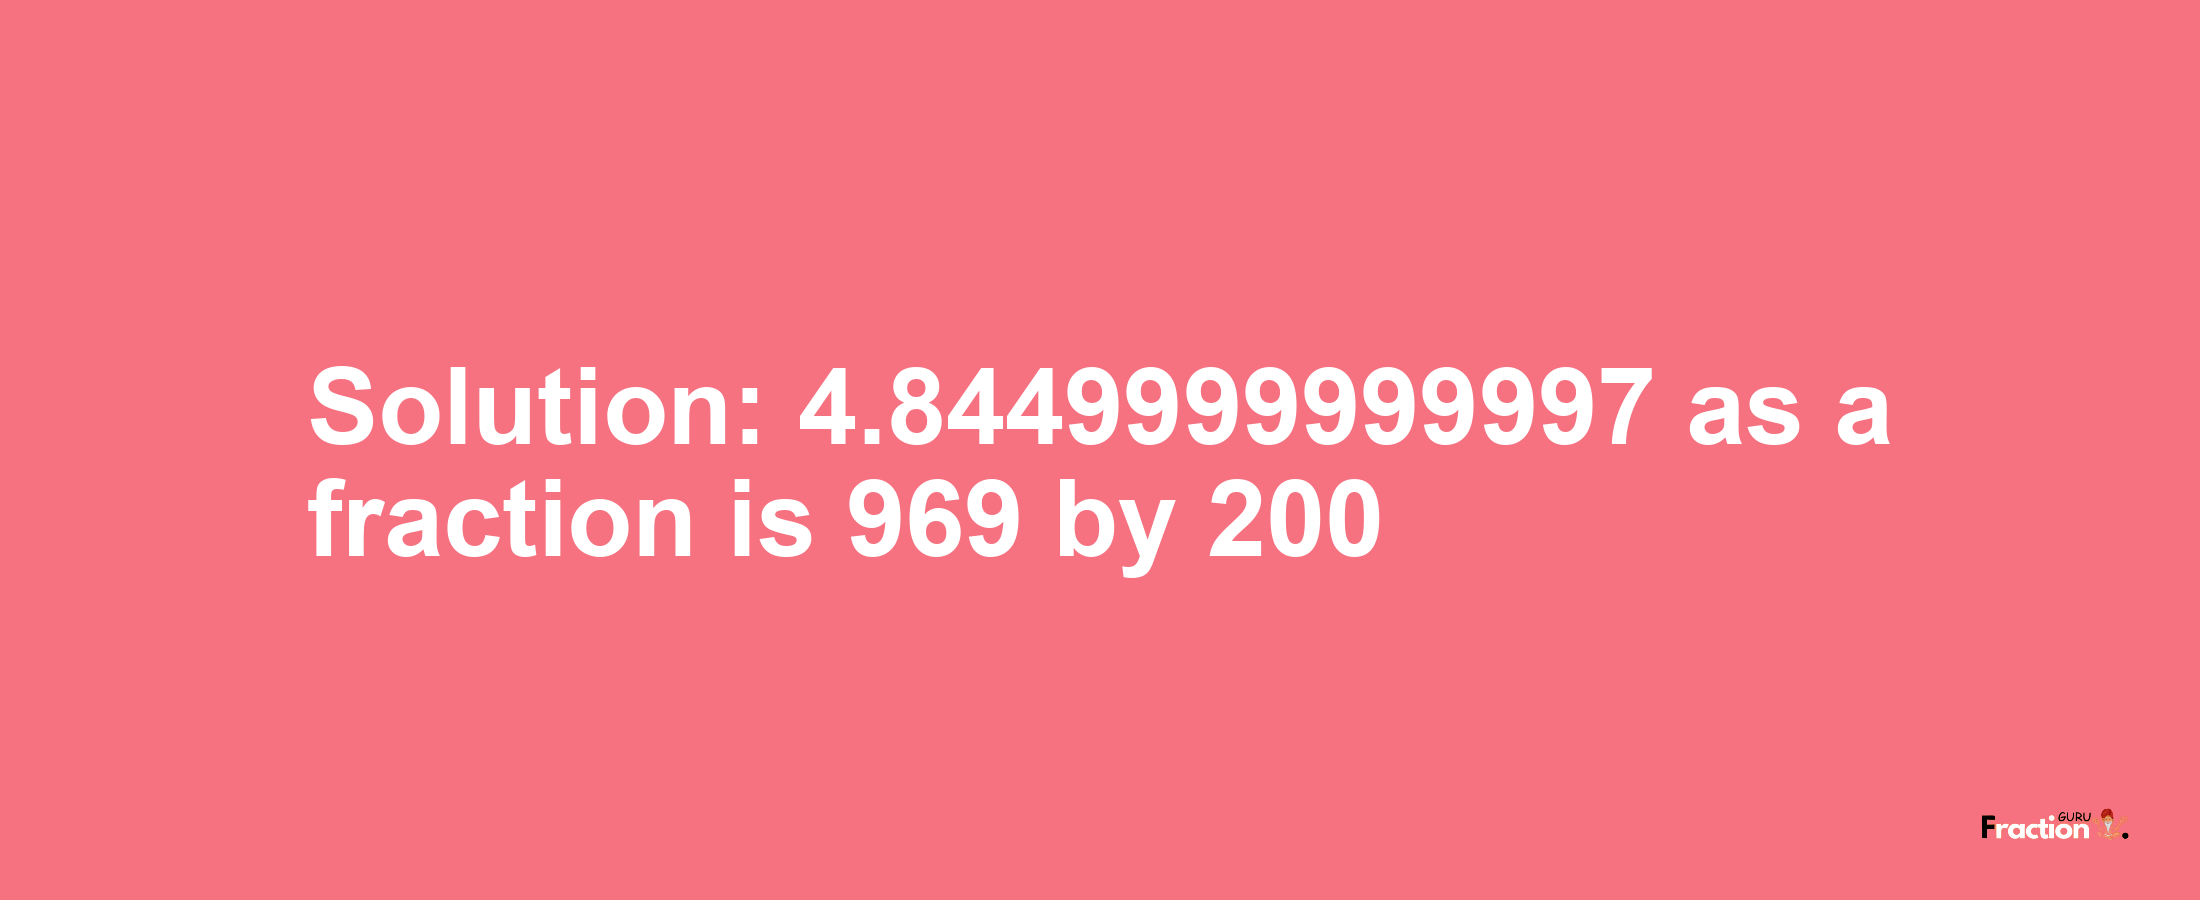 Solution:4.8449999999997 as a fraction is 969/200